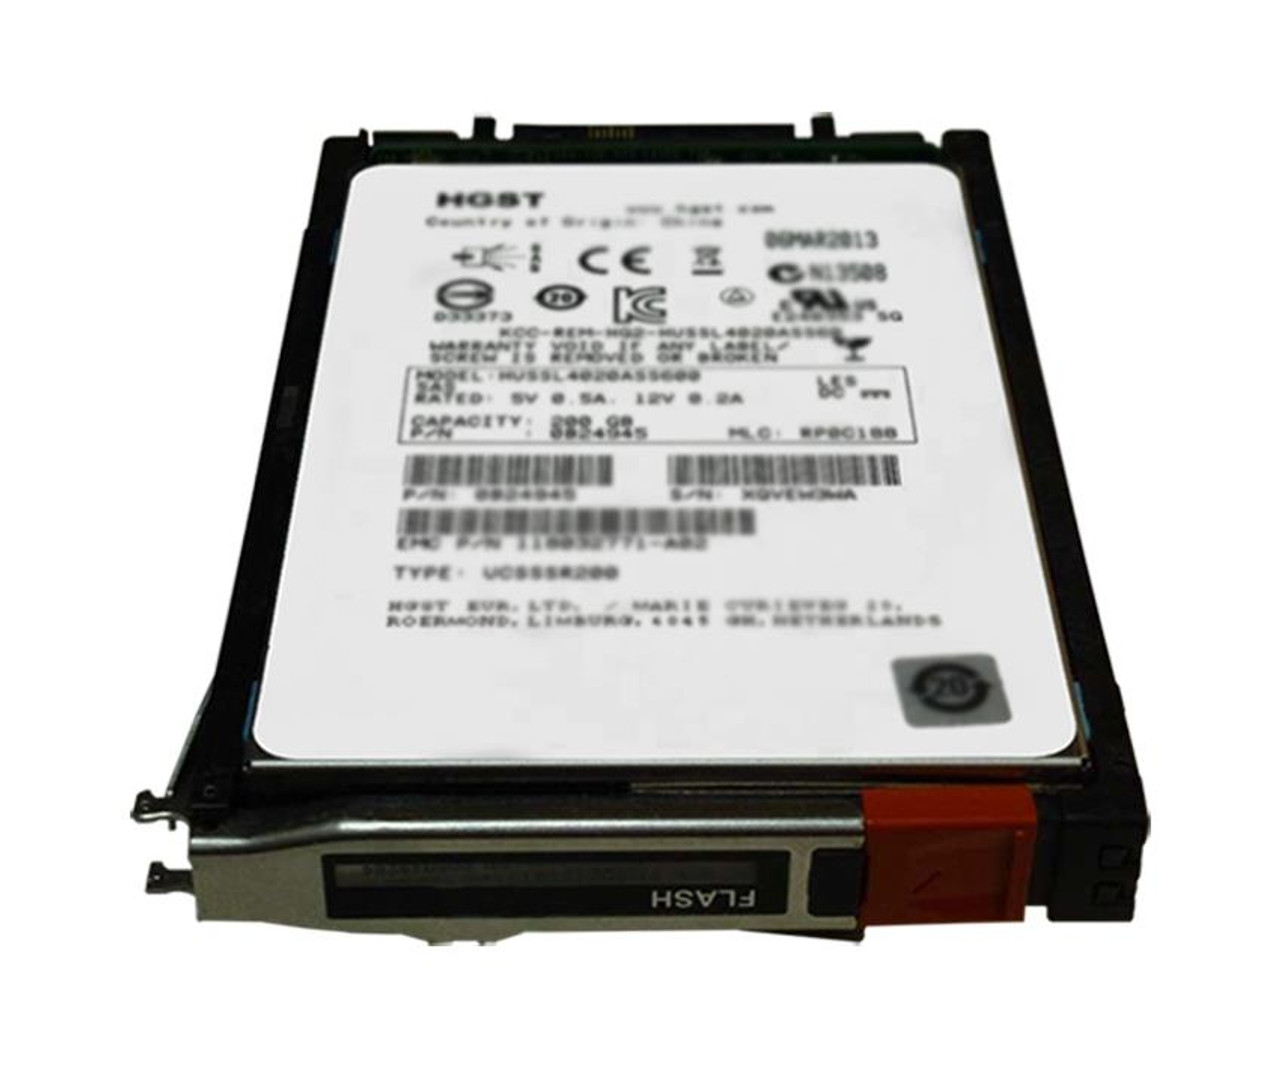 V5-2S6FX-800U EMC 800GB SAS 6Gbps 2.5-inch Internal Solid State Drive (SSD) Upgrade for VNXe1600 25 x 2.5 Enclosure